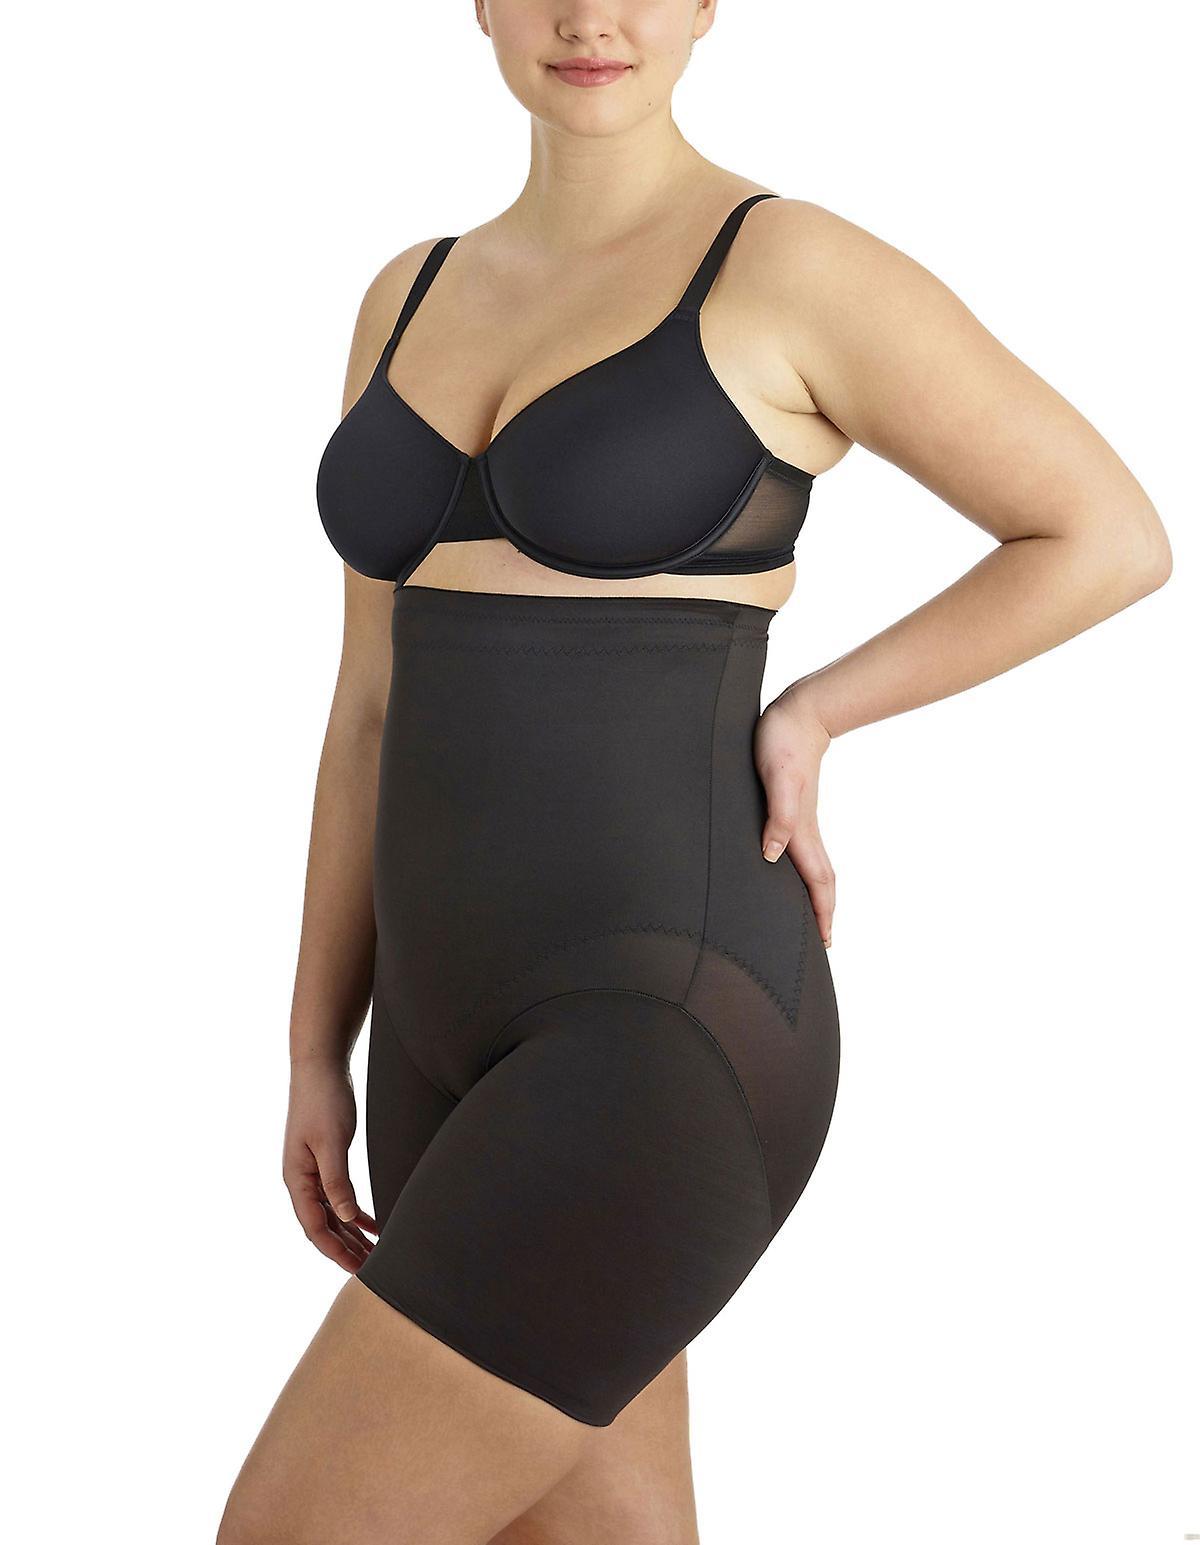 Miraclesuit Plus Flexible Fit Hi Waist Thigh Slimmer 2939 - Shapewear Black / 16 / XL  Available at Illusions Lingerie